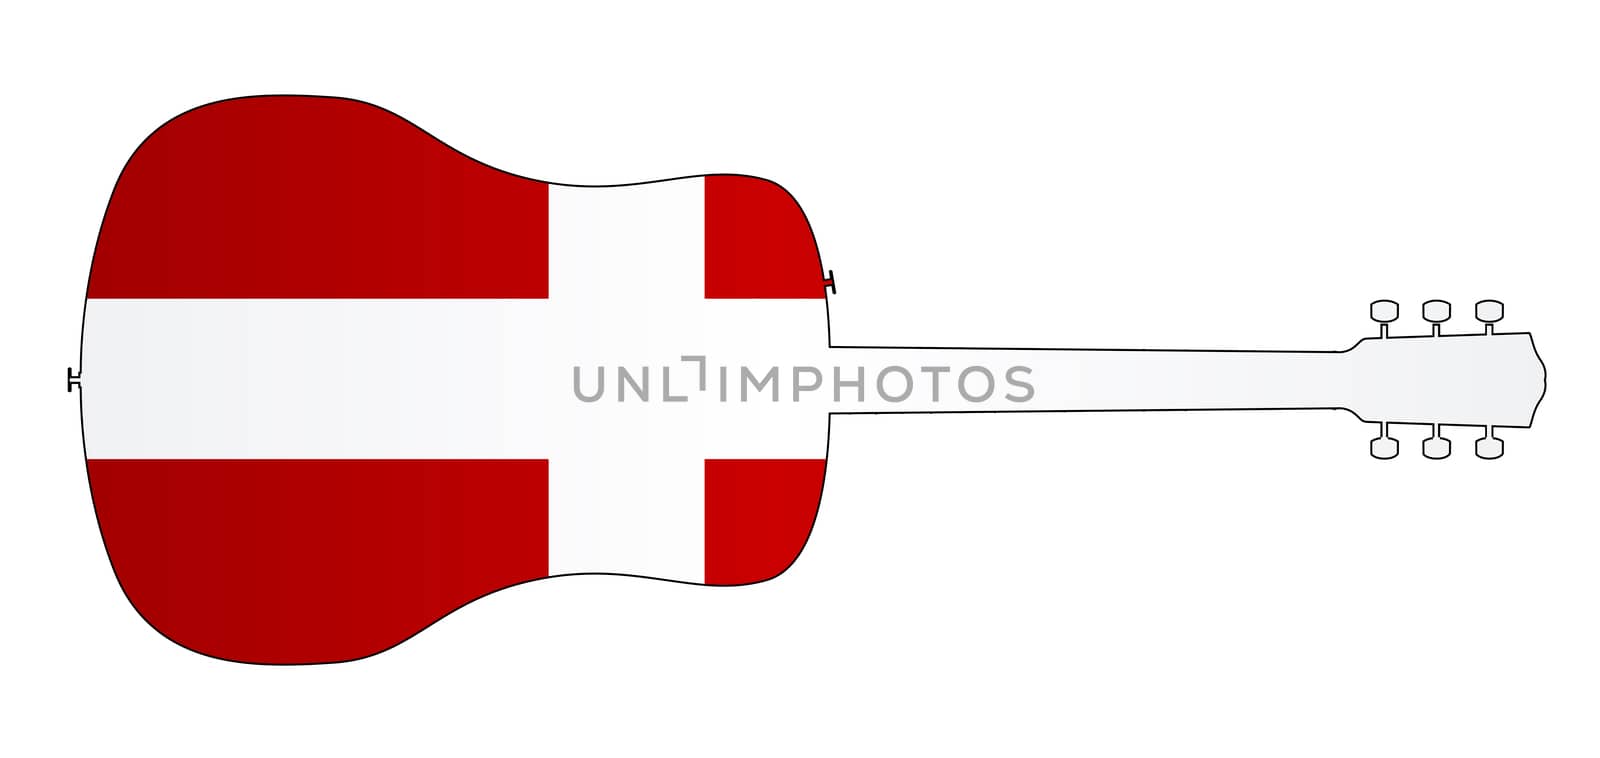 A typical acoustic guitar silhouette isolated over a white background with a Denmark flag